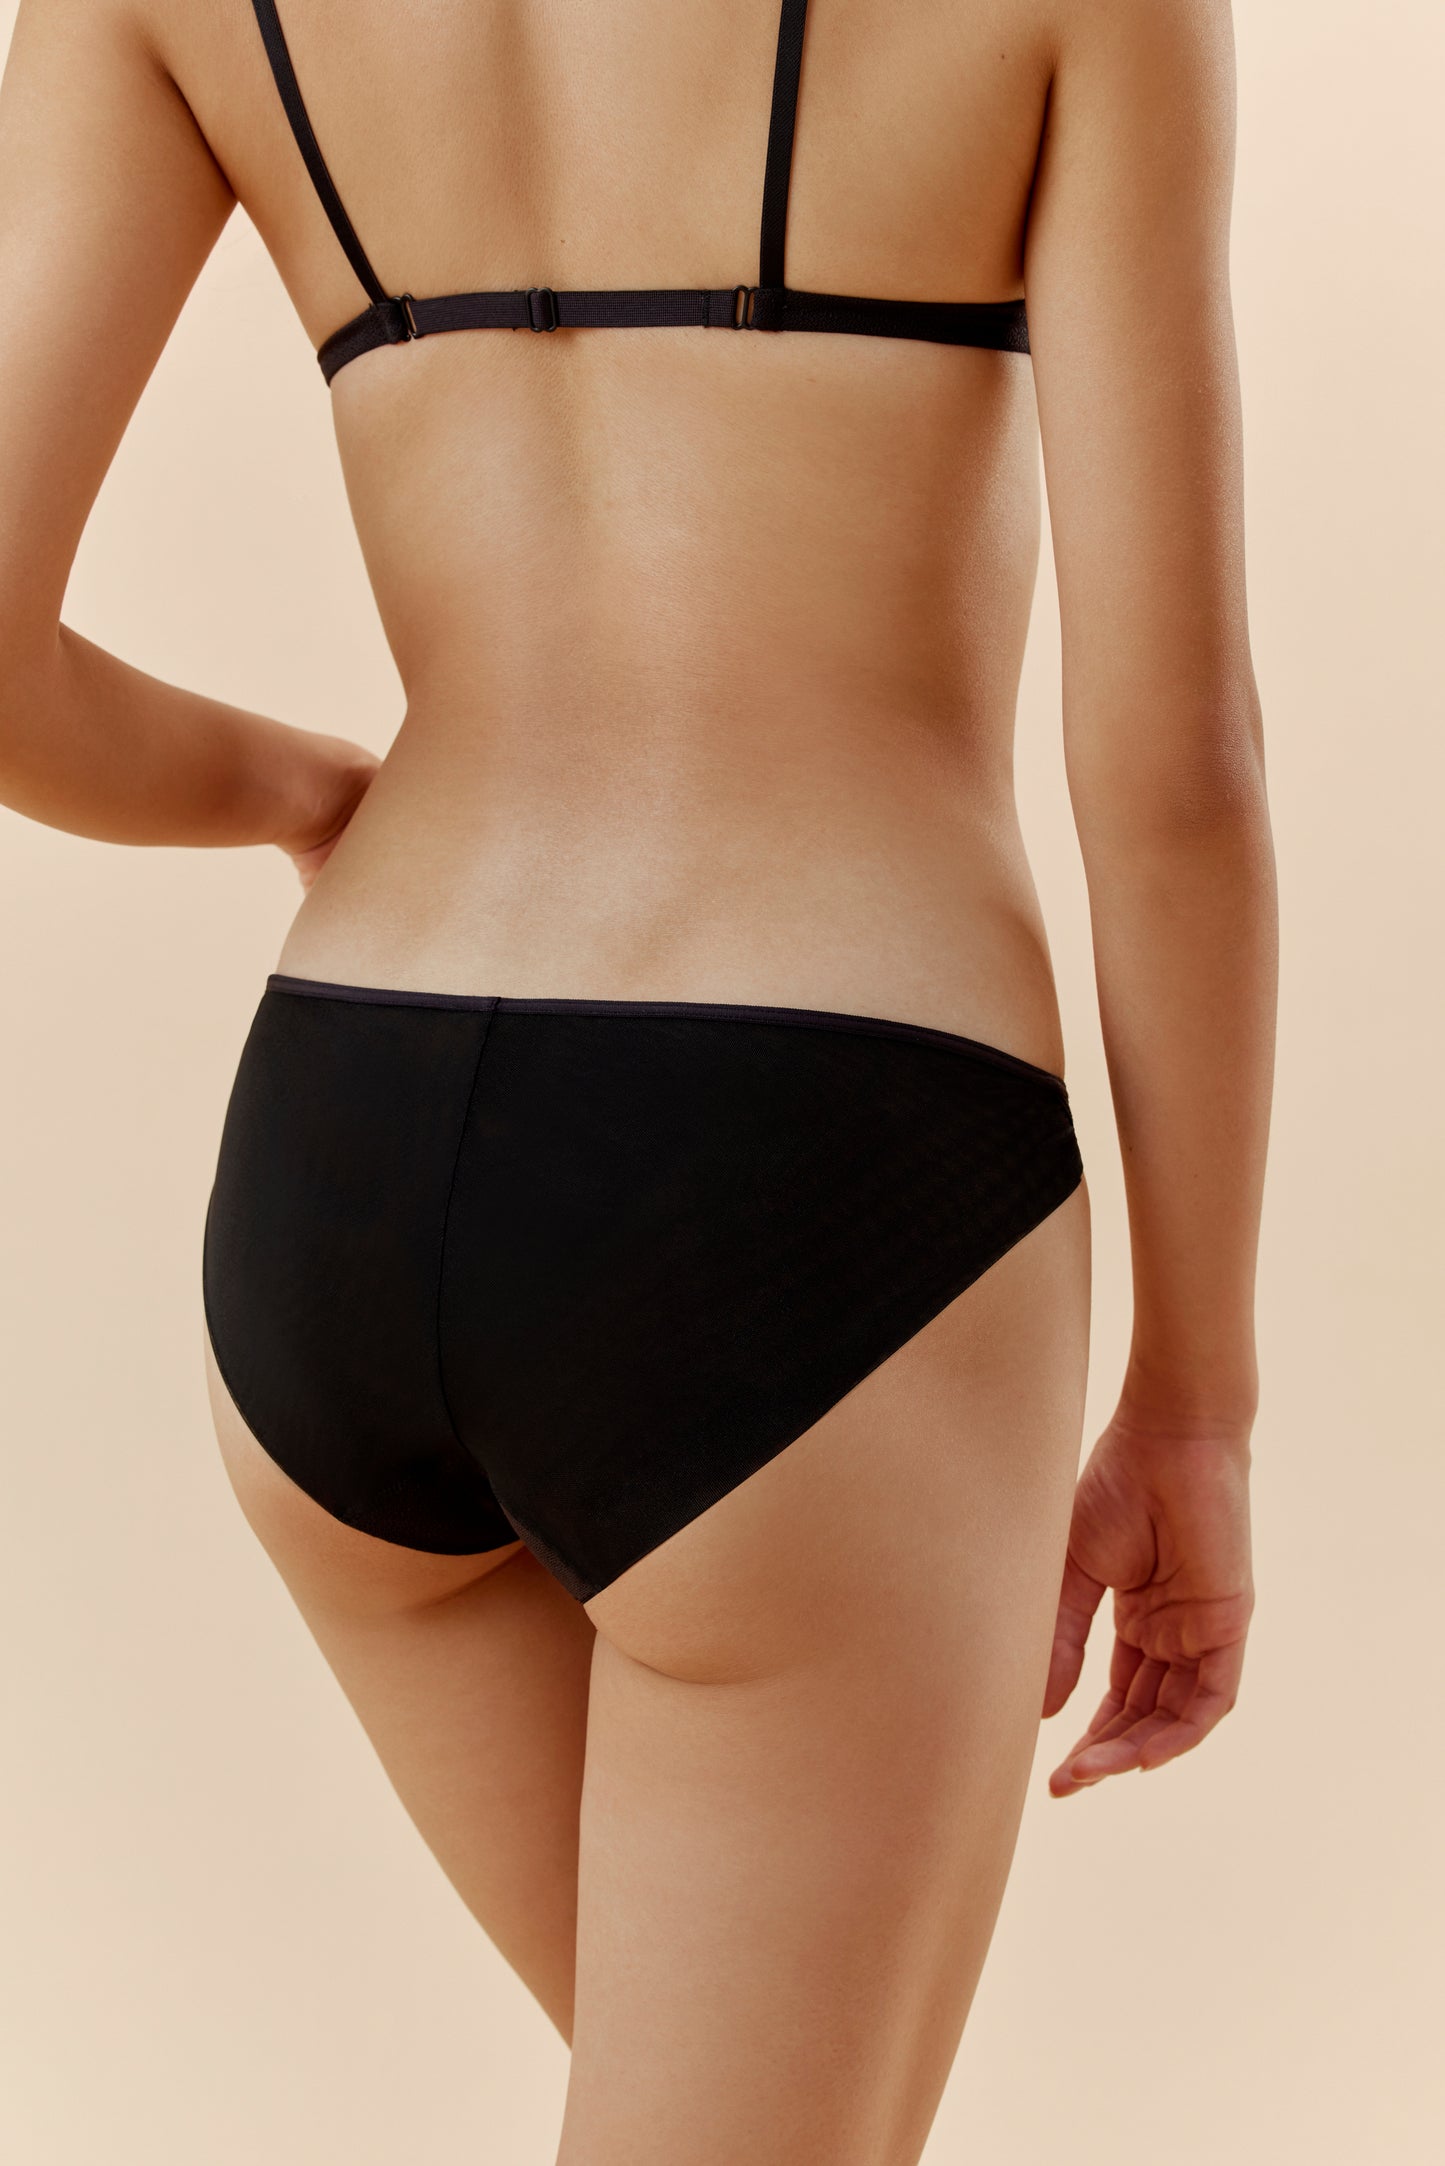 back of a woman wearing a black brief and black bra 